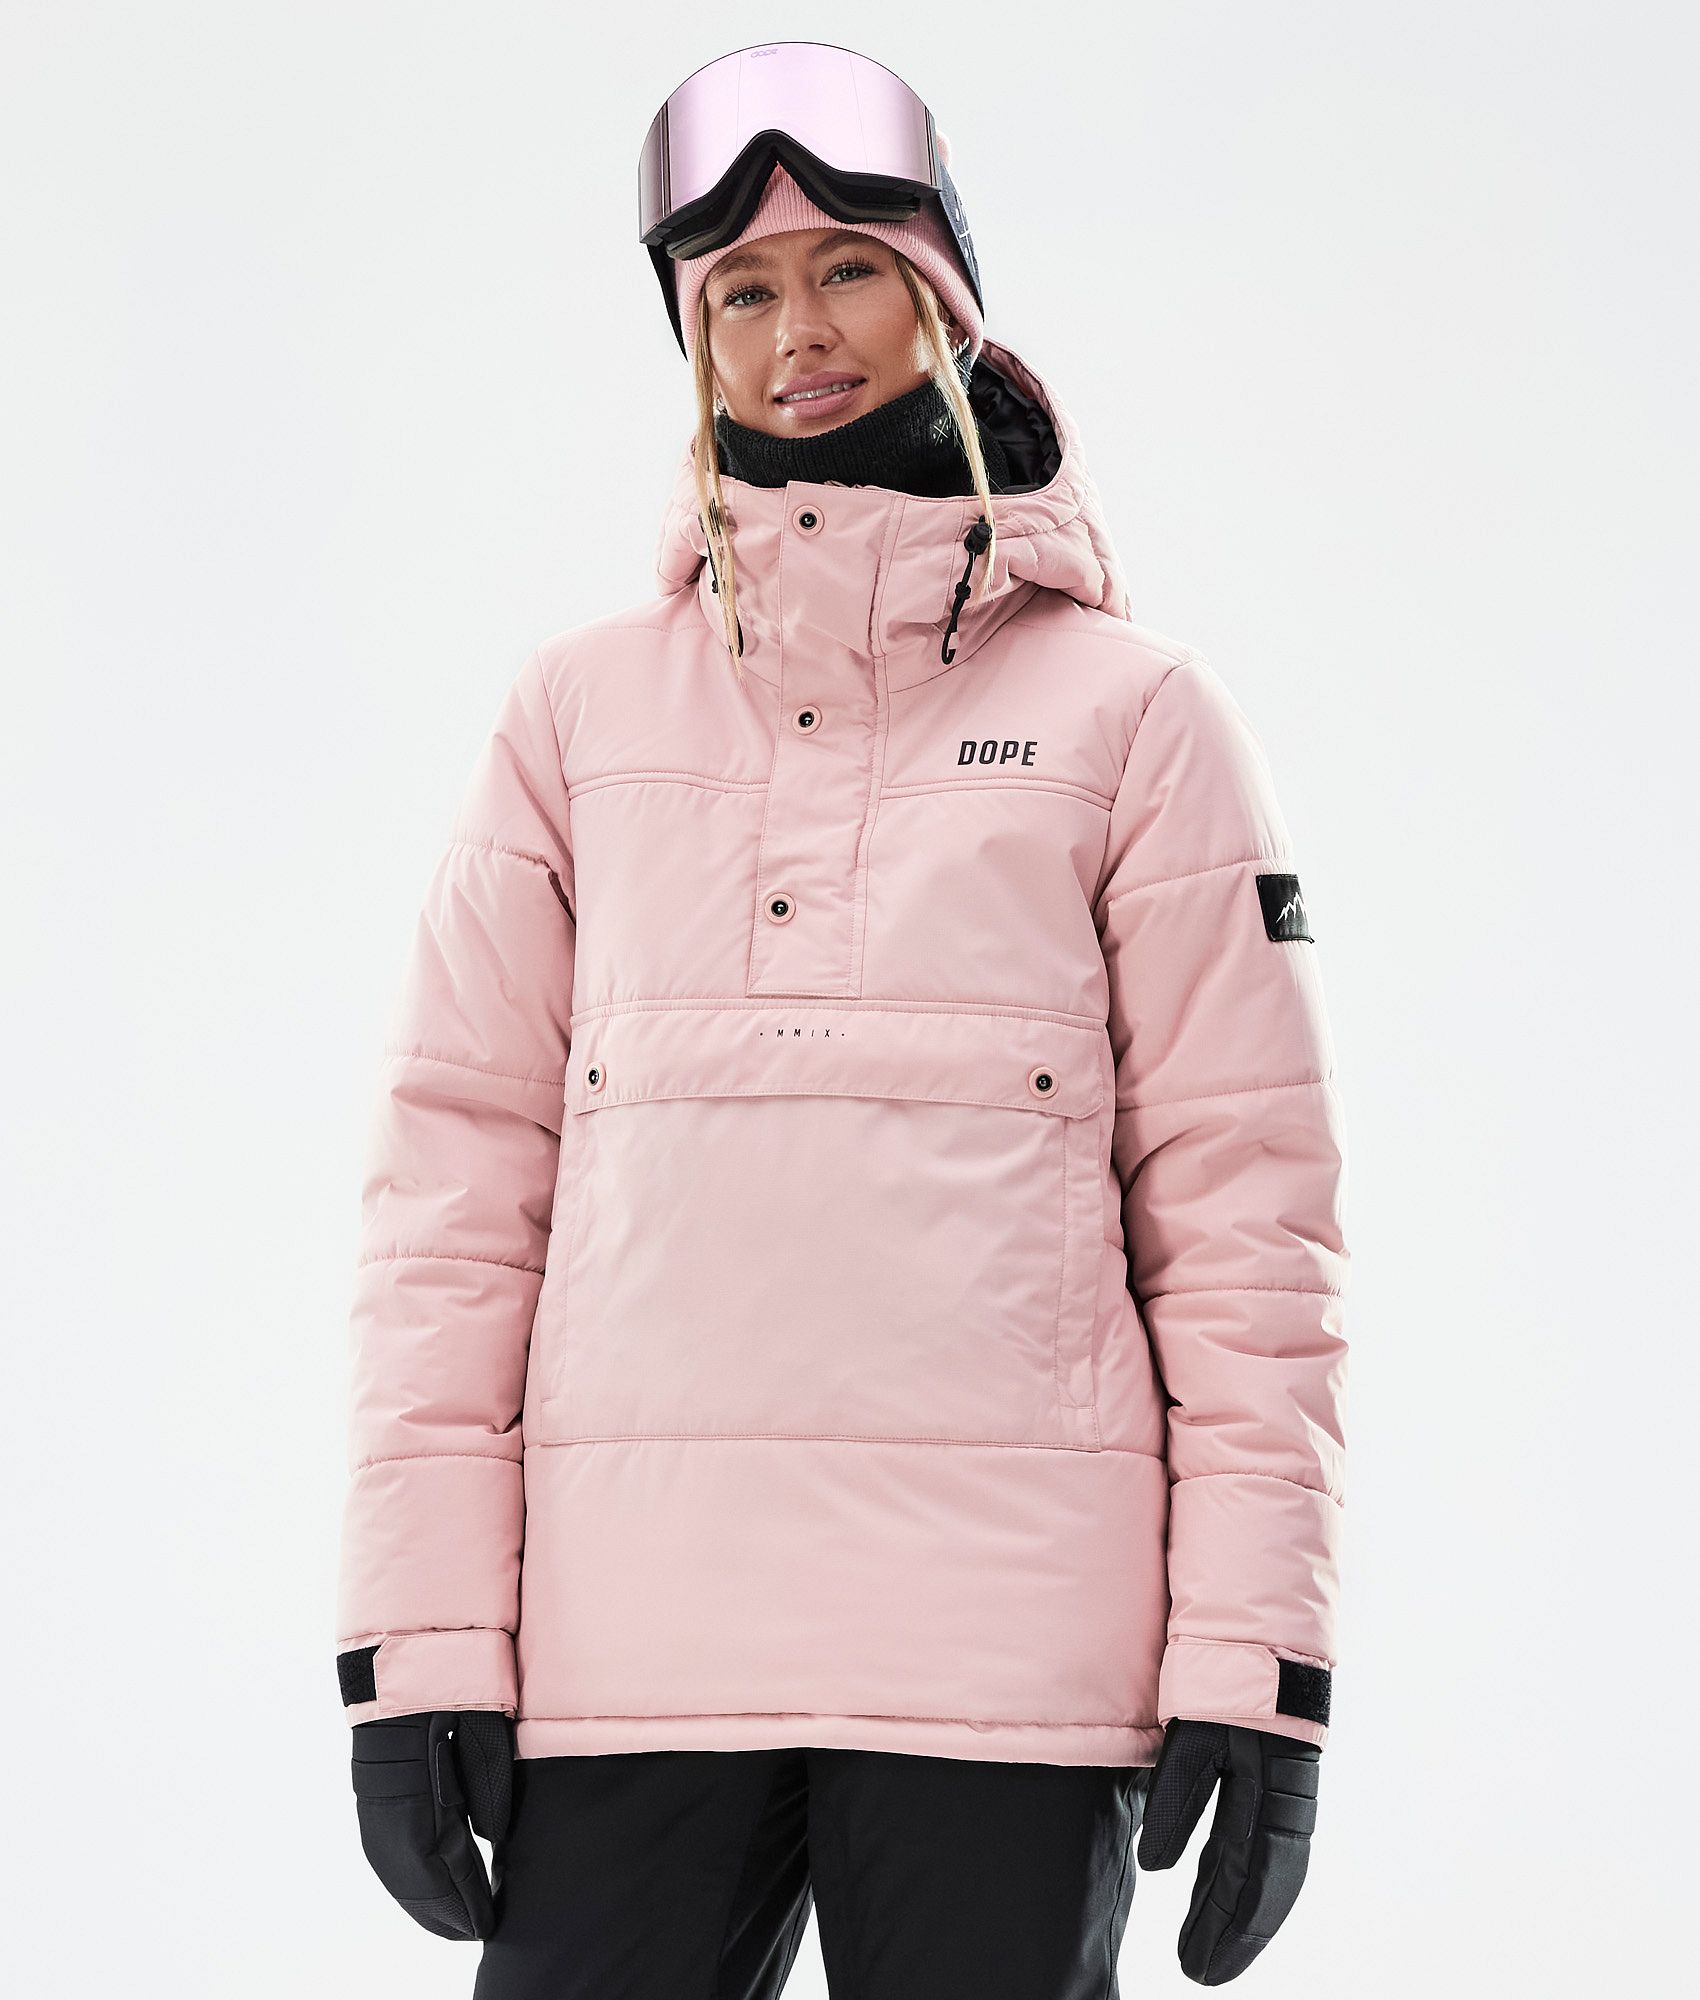 Provisions 045: Women's Snowboard Jackets to Live In – Snowboard Magazine